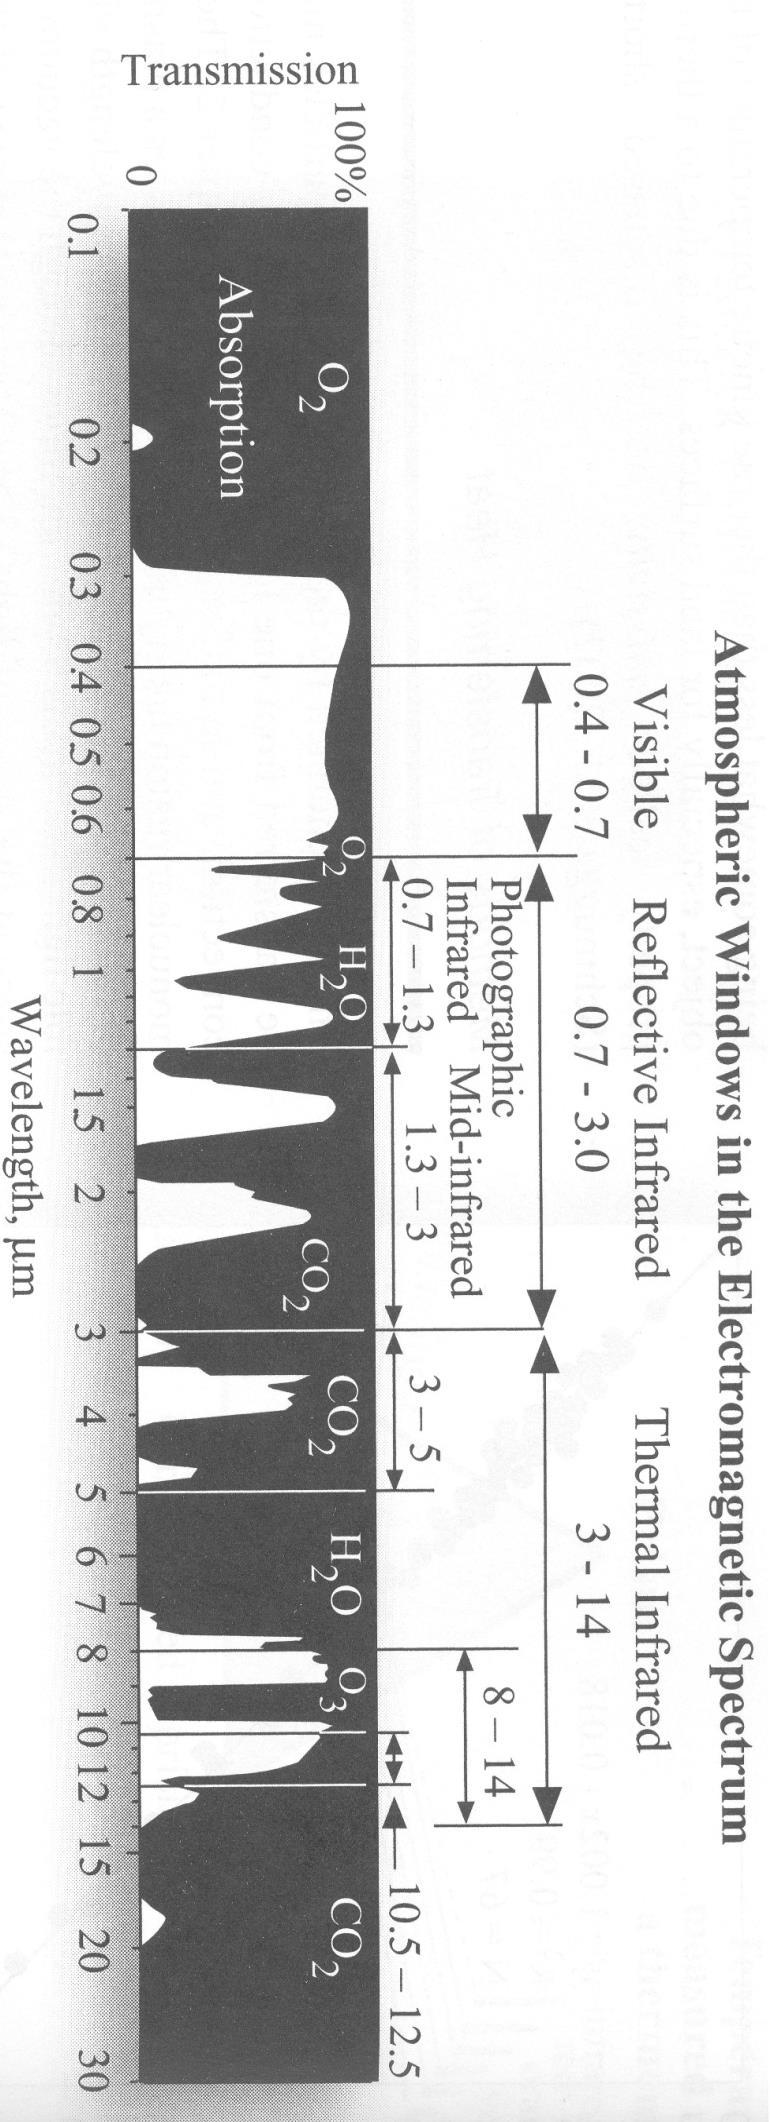 Atmospheric Windows from 0.1 30 μm Source: Jensen (2007). Photographic films can be made sensitive to reflective energy from 0.7-1.